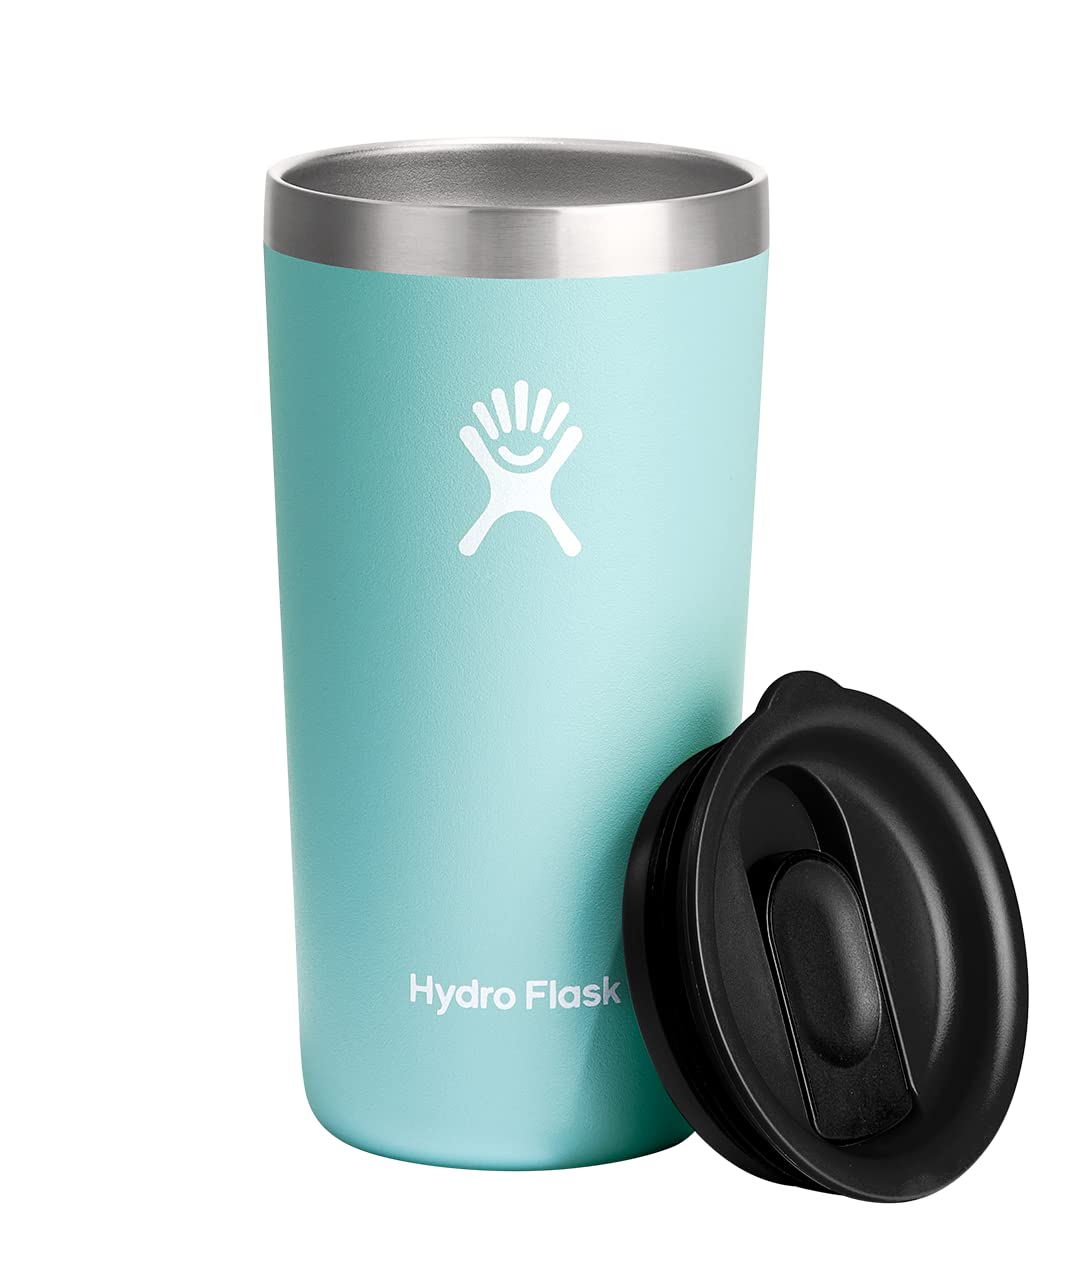 Hydro Flask 12 oz Stainless Steel Reusable All Around Tumbler Dew - Vacuum Insulated, Dishwasher Safe, BPA-Free, Non-Toxic